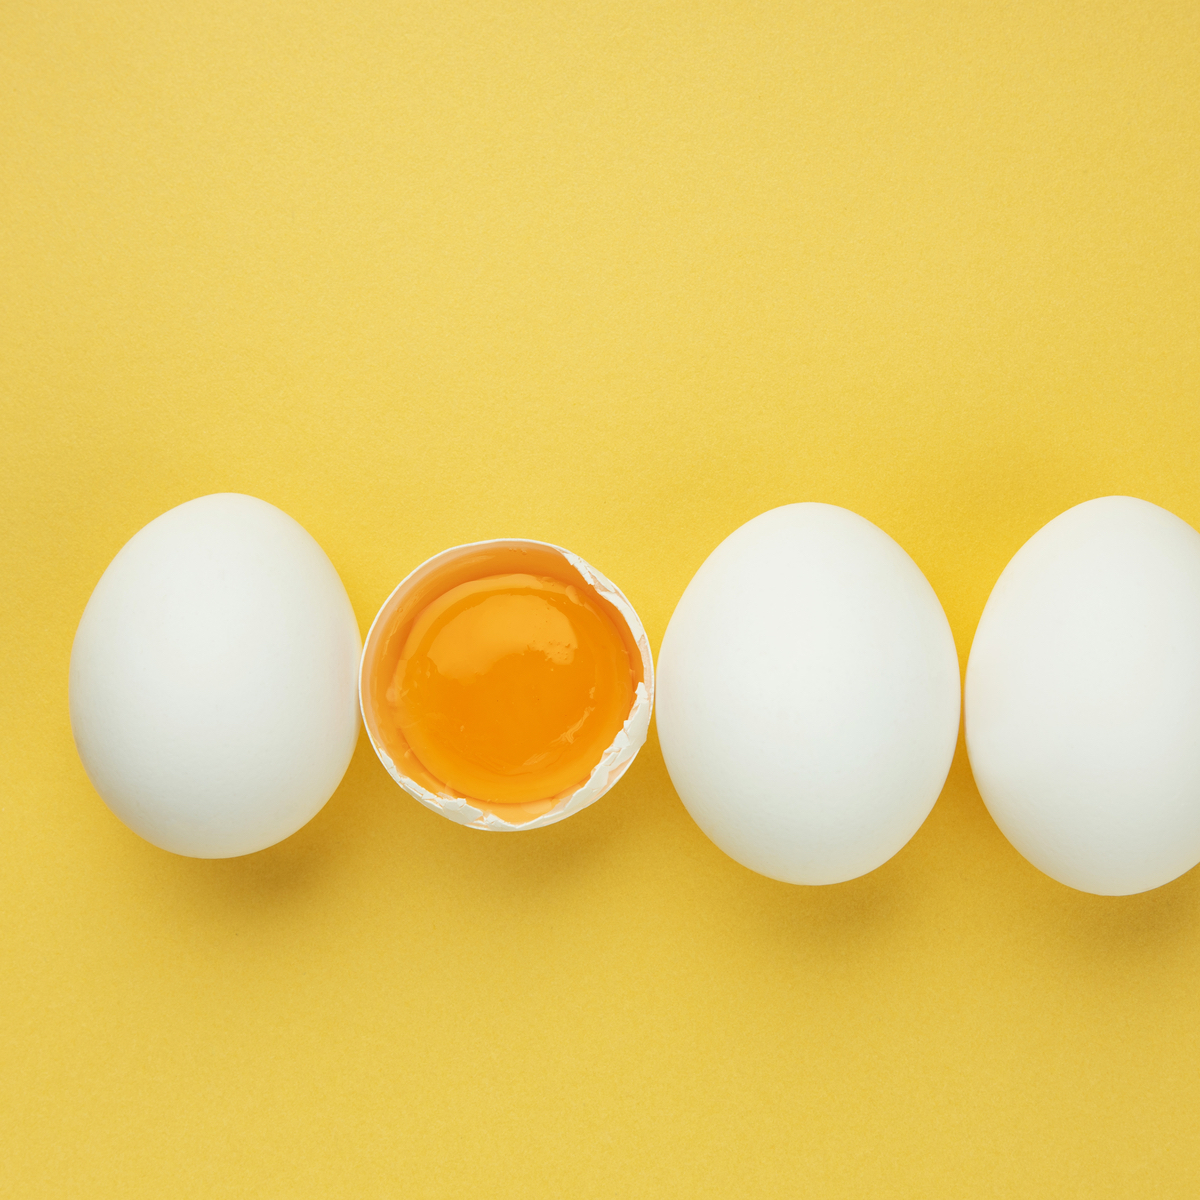 Egg Nutrition: Are Eggs Good for You?